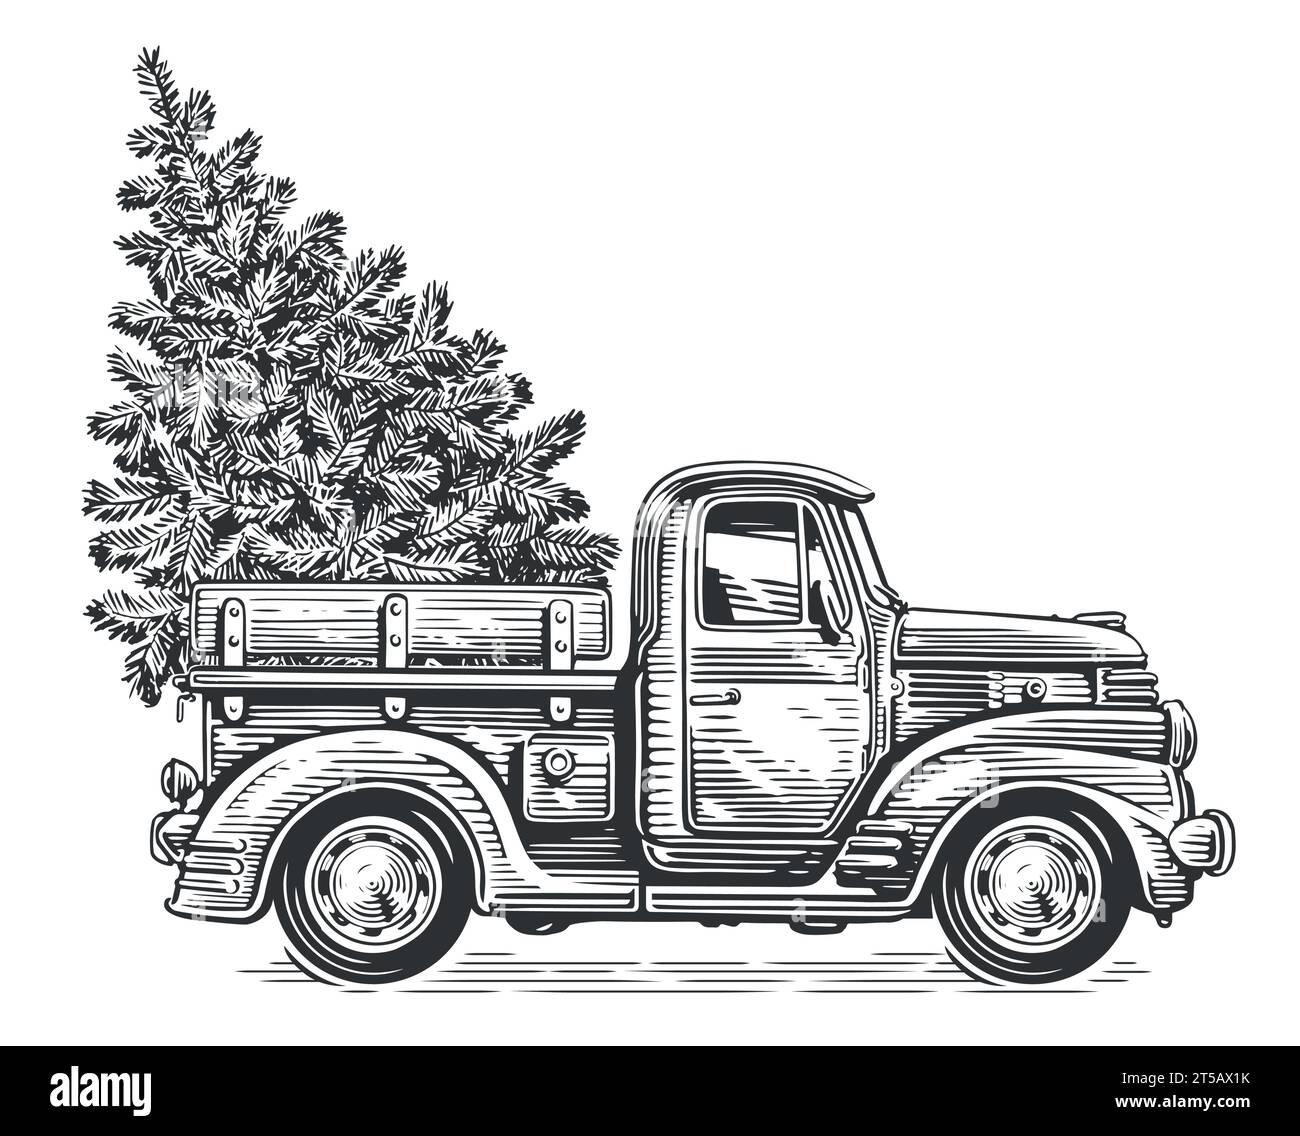 Christmas retro truck with pine tree in sketch style. Hand drawn vintage vector illustration Stock Vector